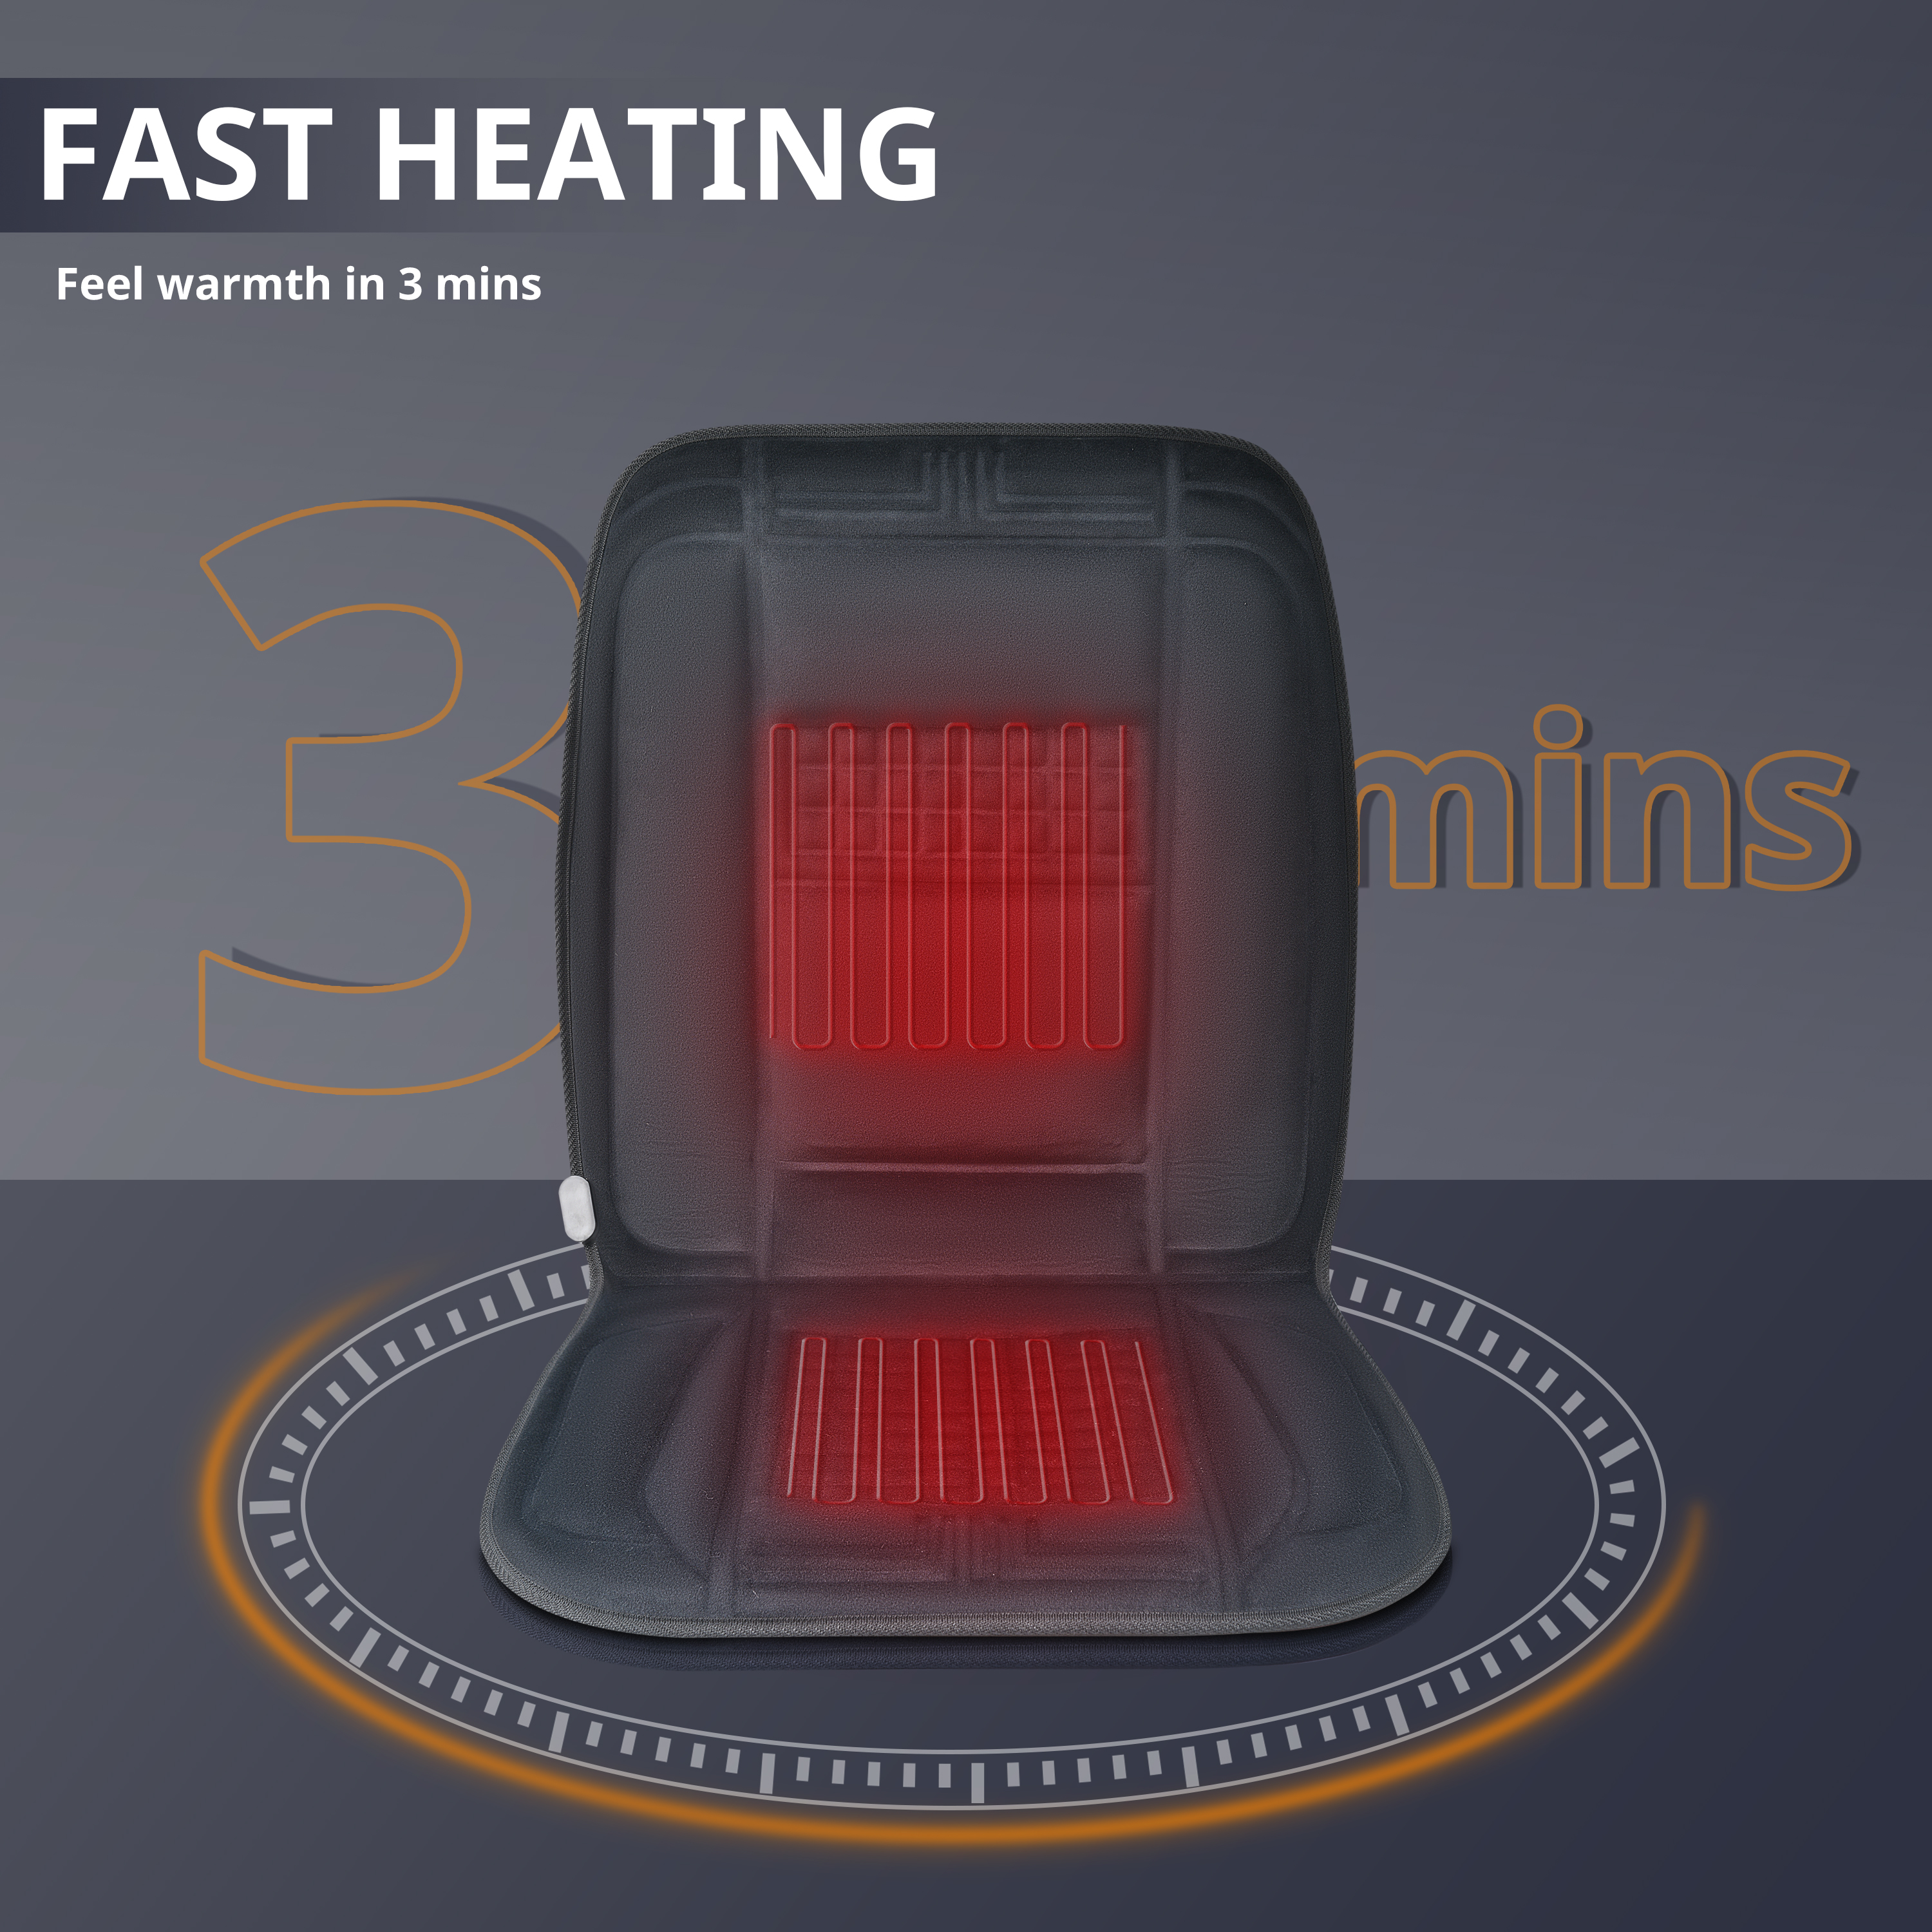 Heated Seat Cover with Fast Heating for Back in Winter